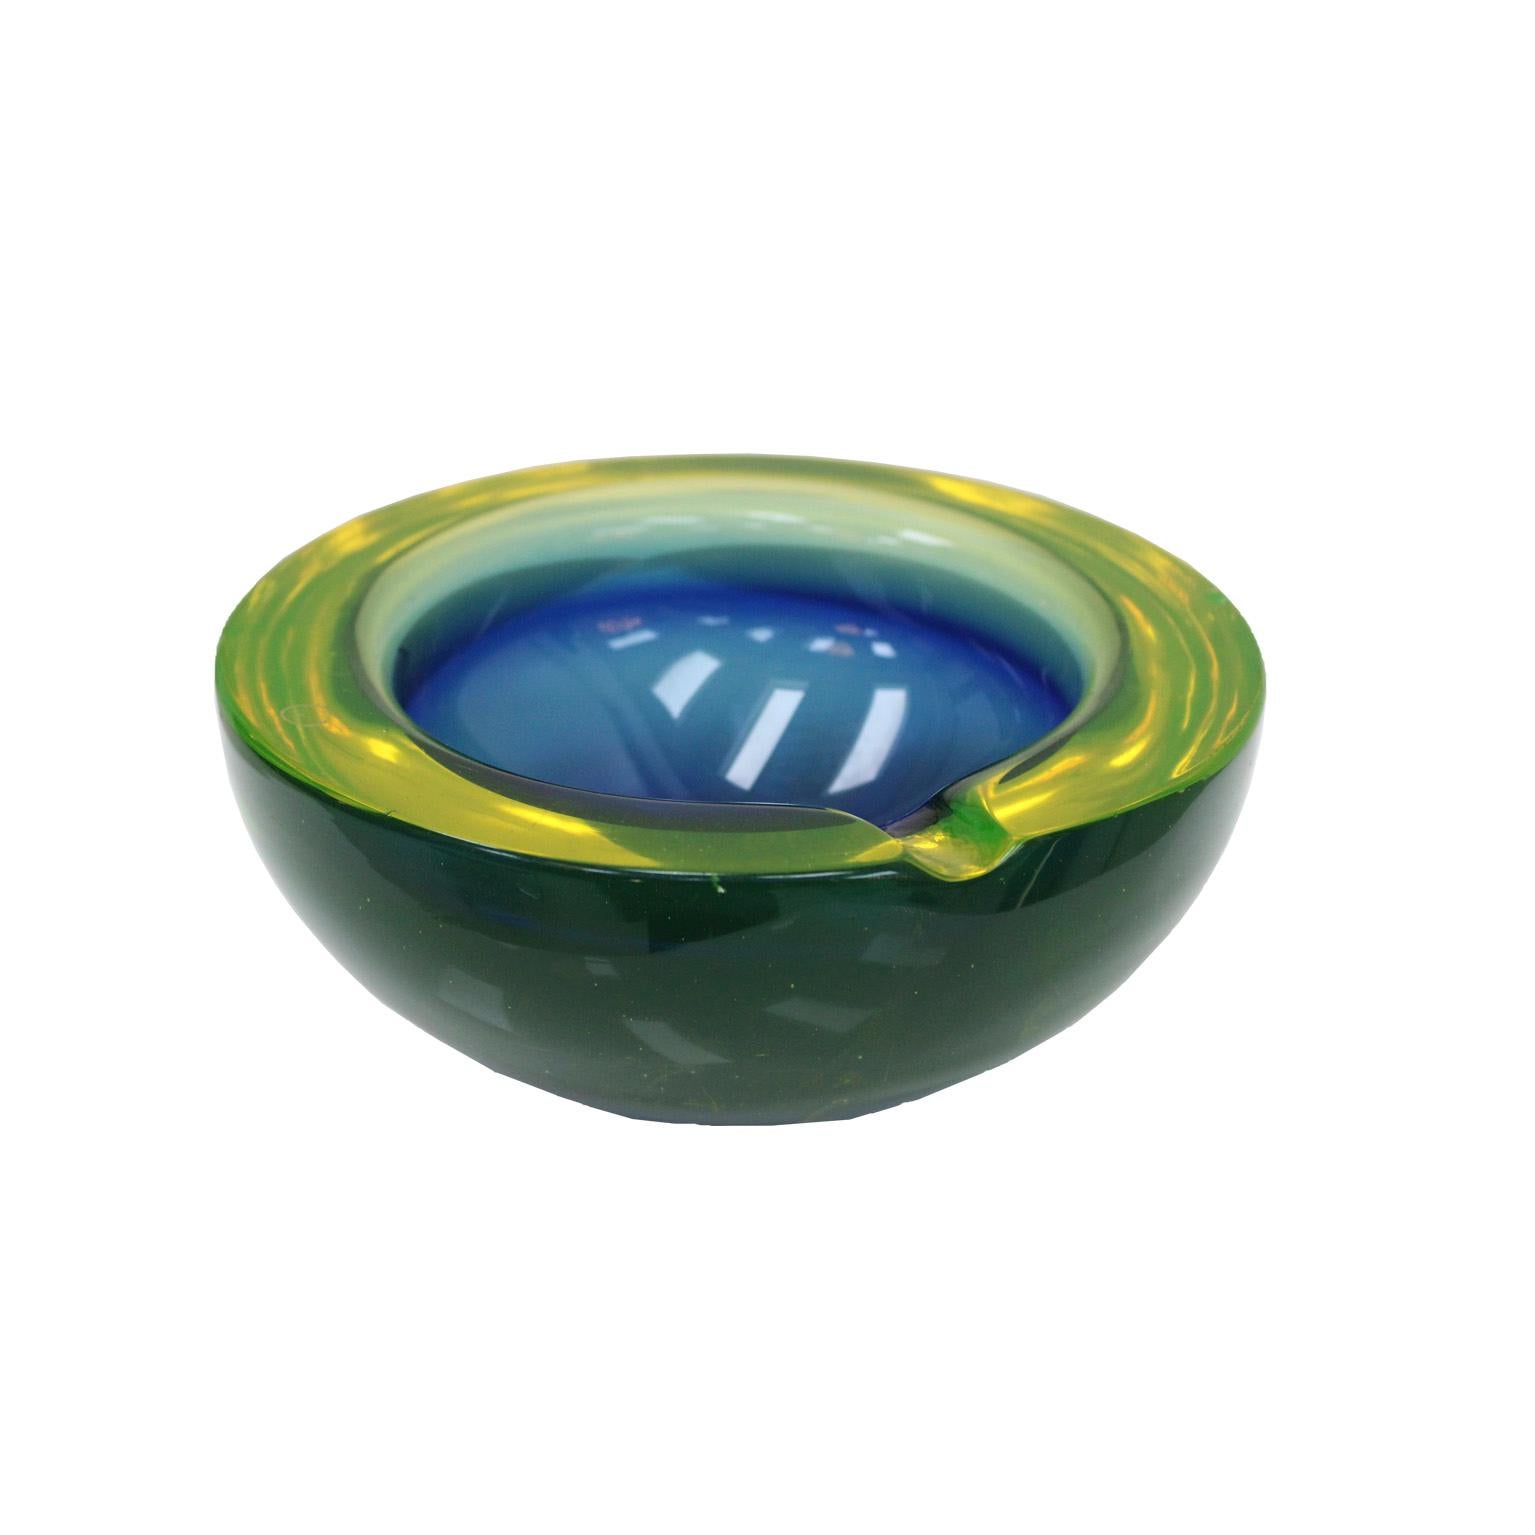 Mid-century Modern Glass Ashtray. Attributed to Flavio Poli for Seguso. Italy, 50s.
In sommerso glass, the blue body is submerged in a very slightly yellow mass. (Color variant Giallo – Blu)

Every item LA Studio offers is checked by our team of 10